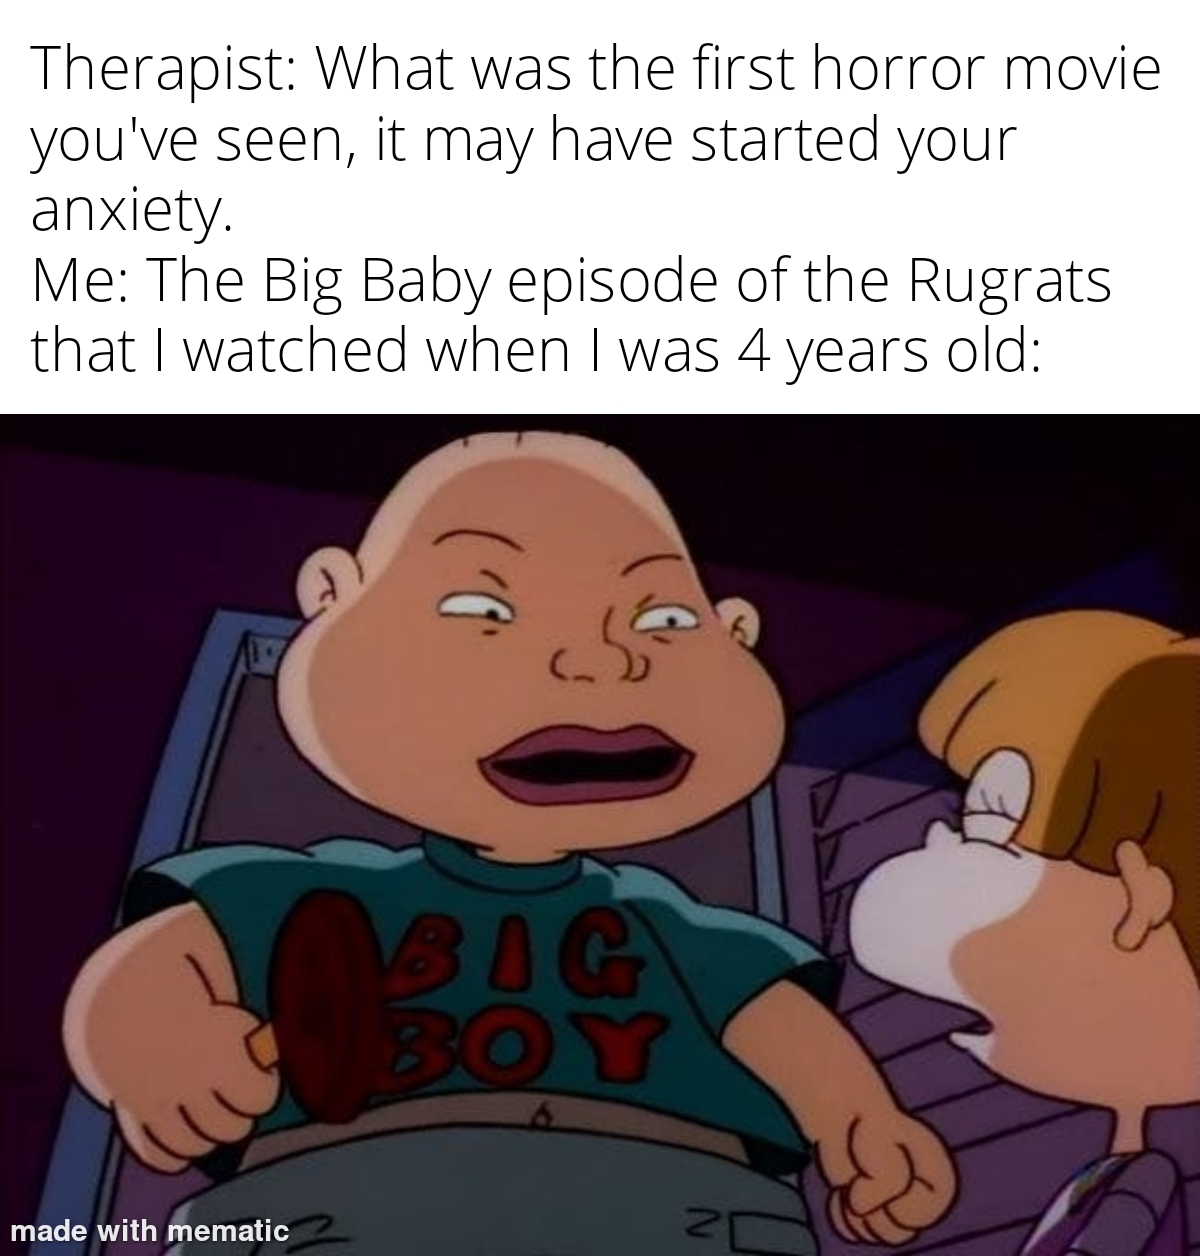 dank memes - rugrats scary - Therapist What was the first horror movie you've seen, it may have started your anxiety Me The Big Baby episode of the Rugrats that I watched when I was 4 years old Vbdg Boy made with mematic